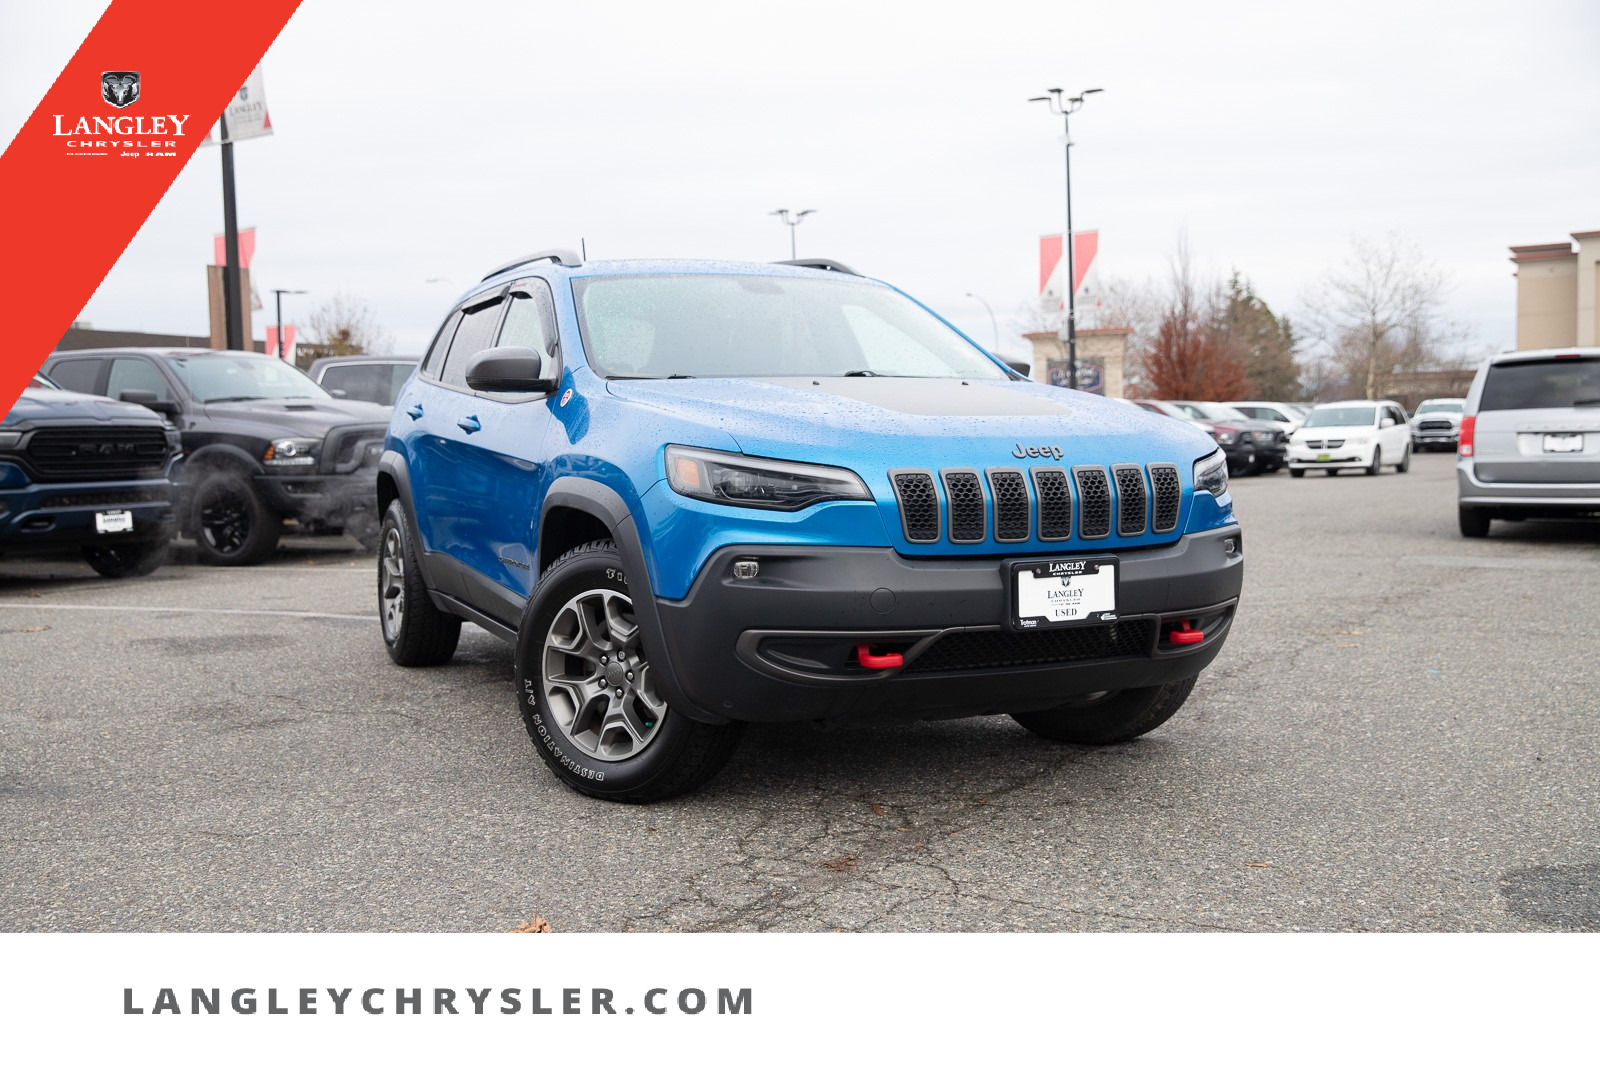 2020 Jeep Cherokee Trailhawk Pano Roof |